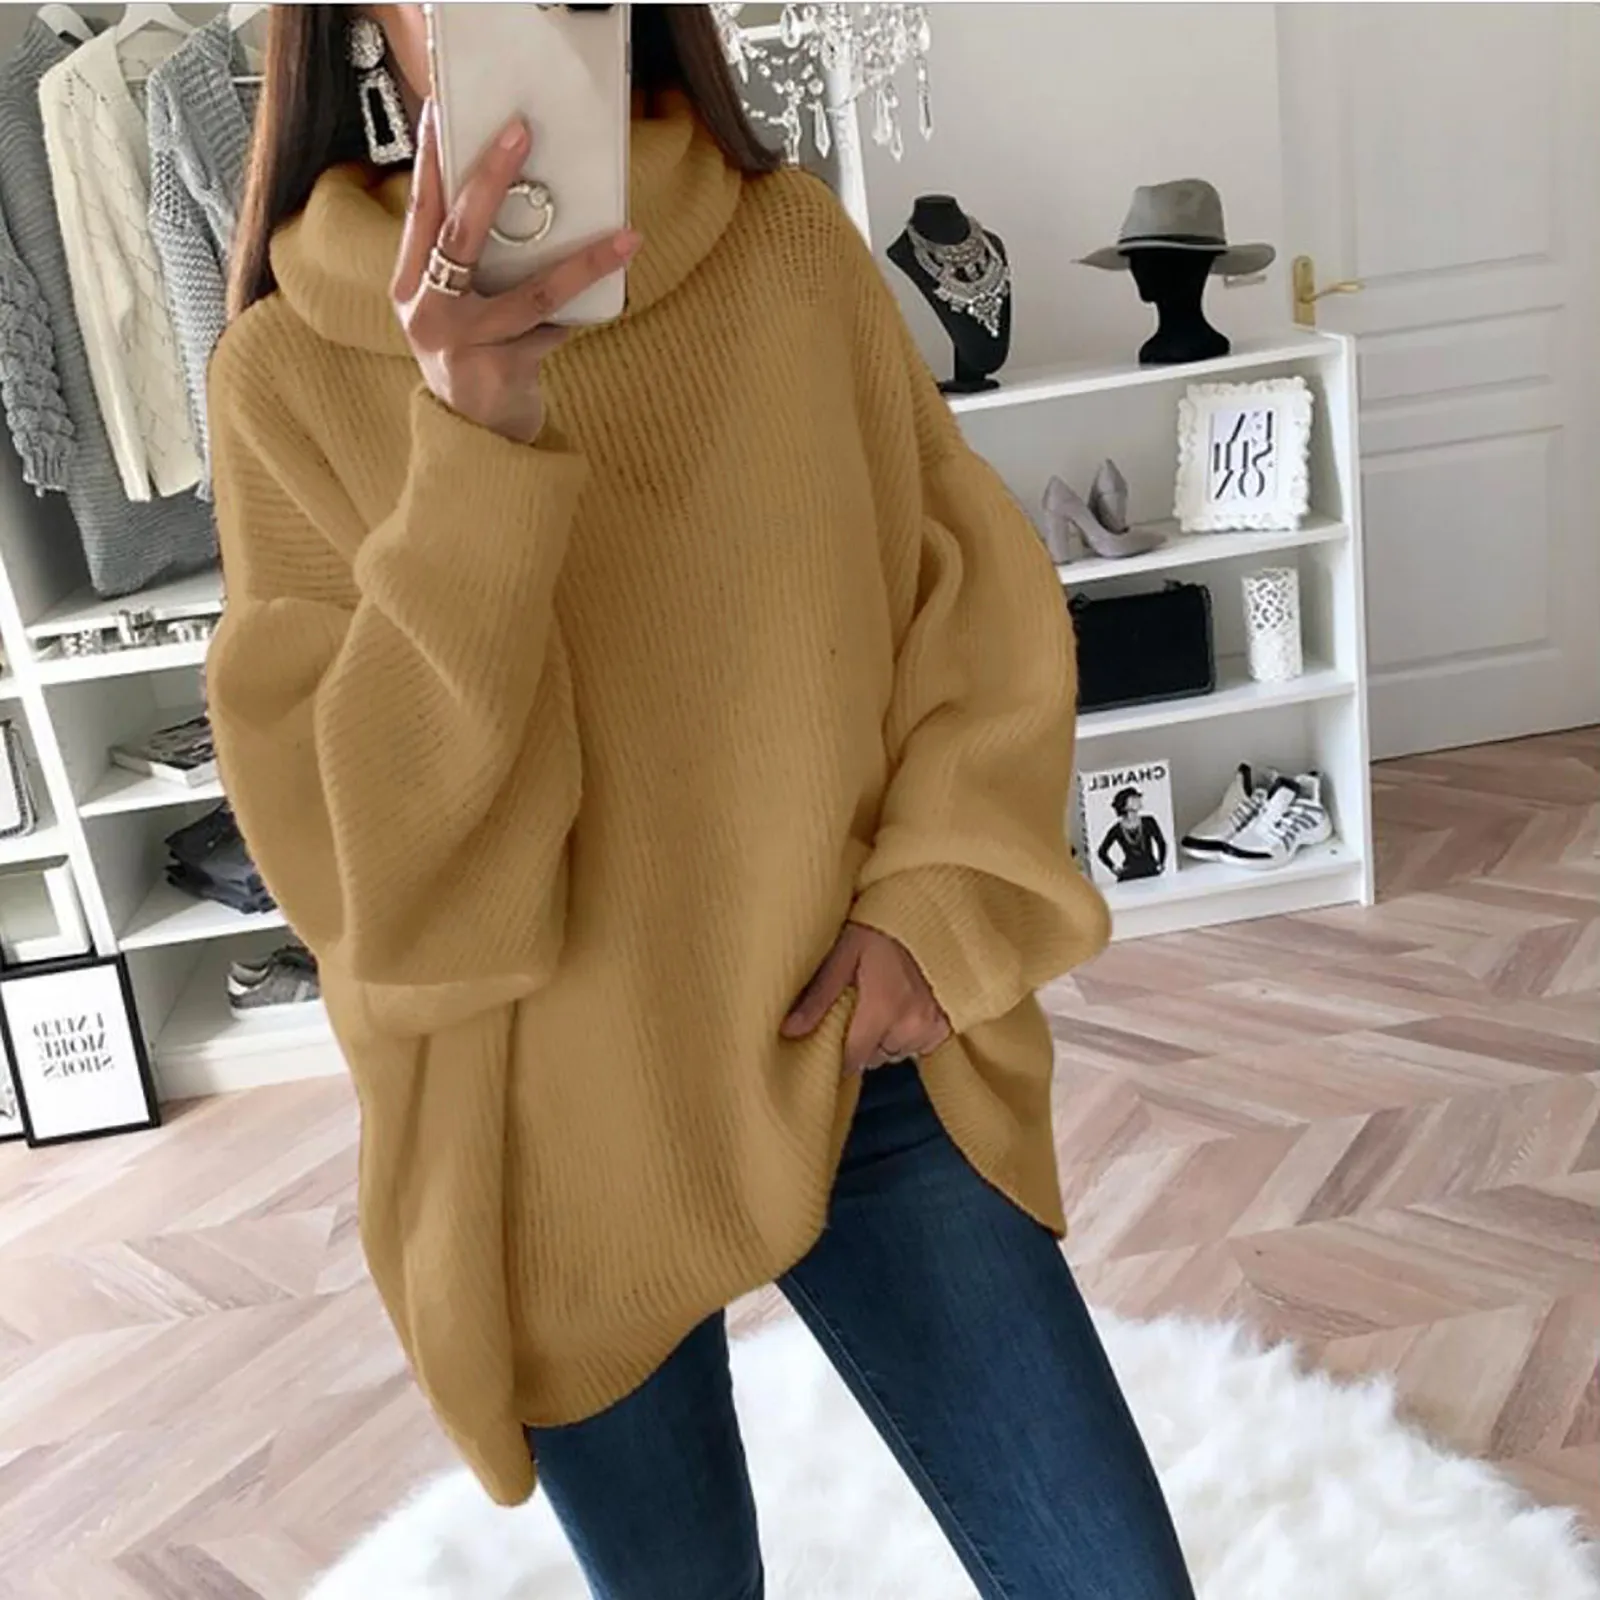 Fashion Women Sweatshirts Autumn Winter Top Long Sleeve h Warm Pullover Kpop Ladies Tops Women Clothes 2021 Pure Pullovers